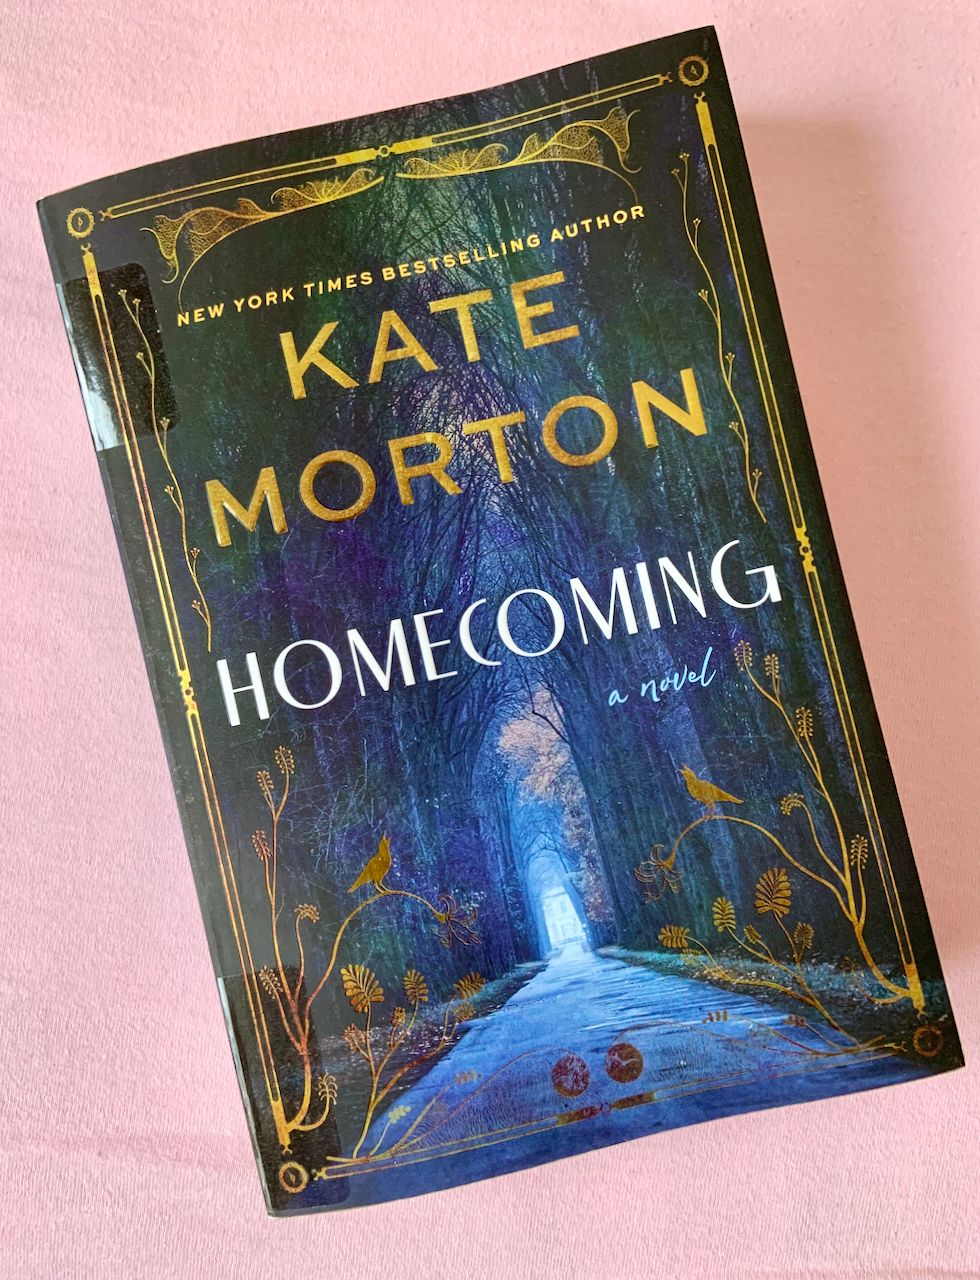 Paperback copy of Homecoming by Kate Morton, featuring a trail through the woods with a blue light at the end